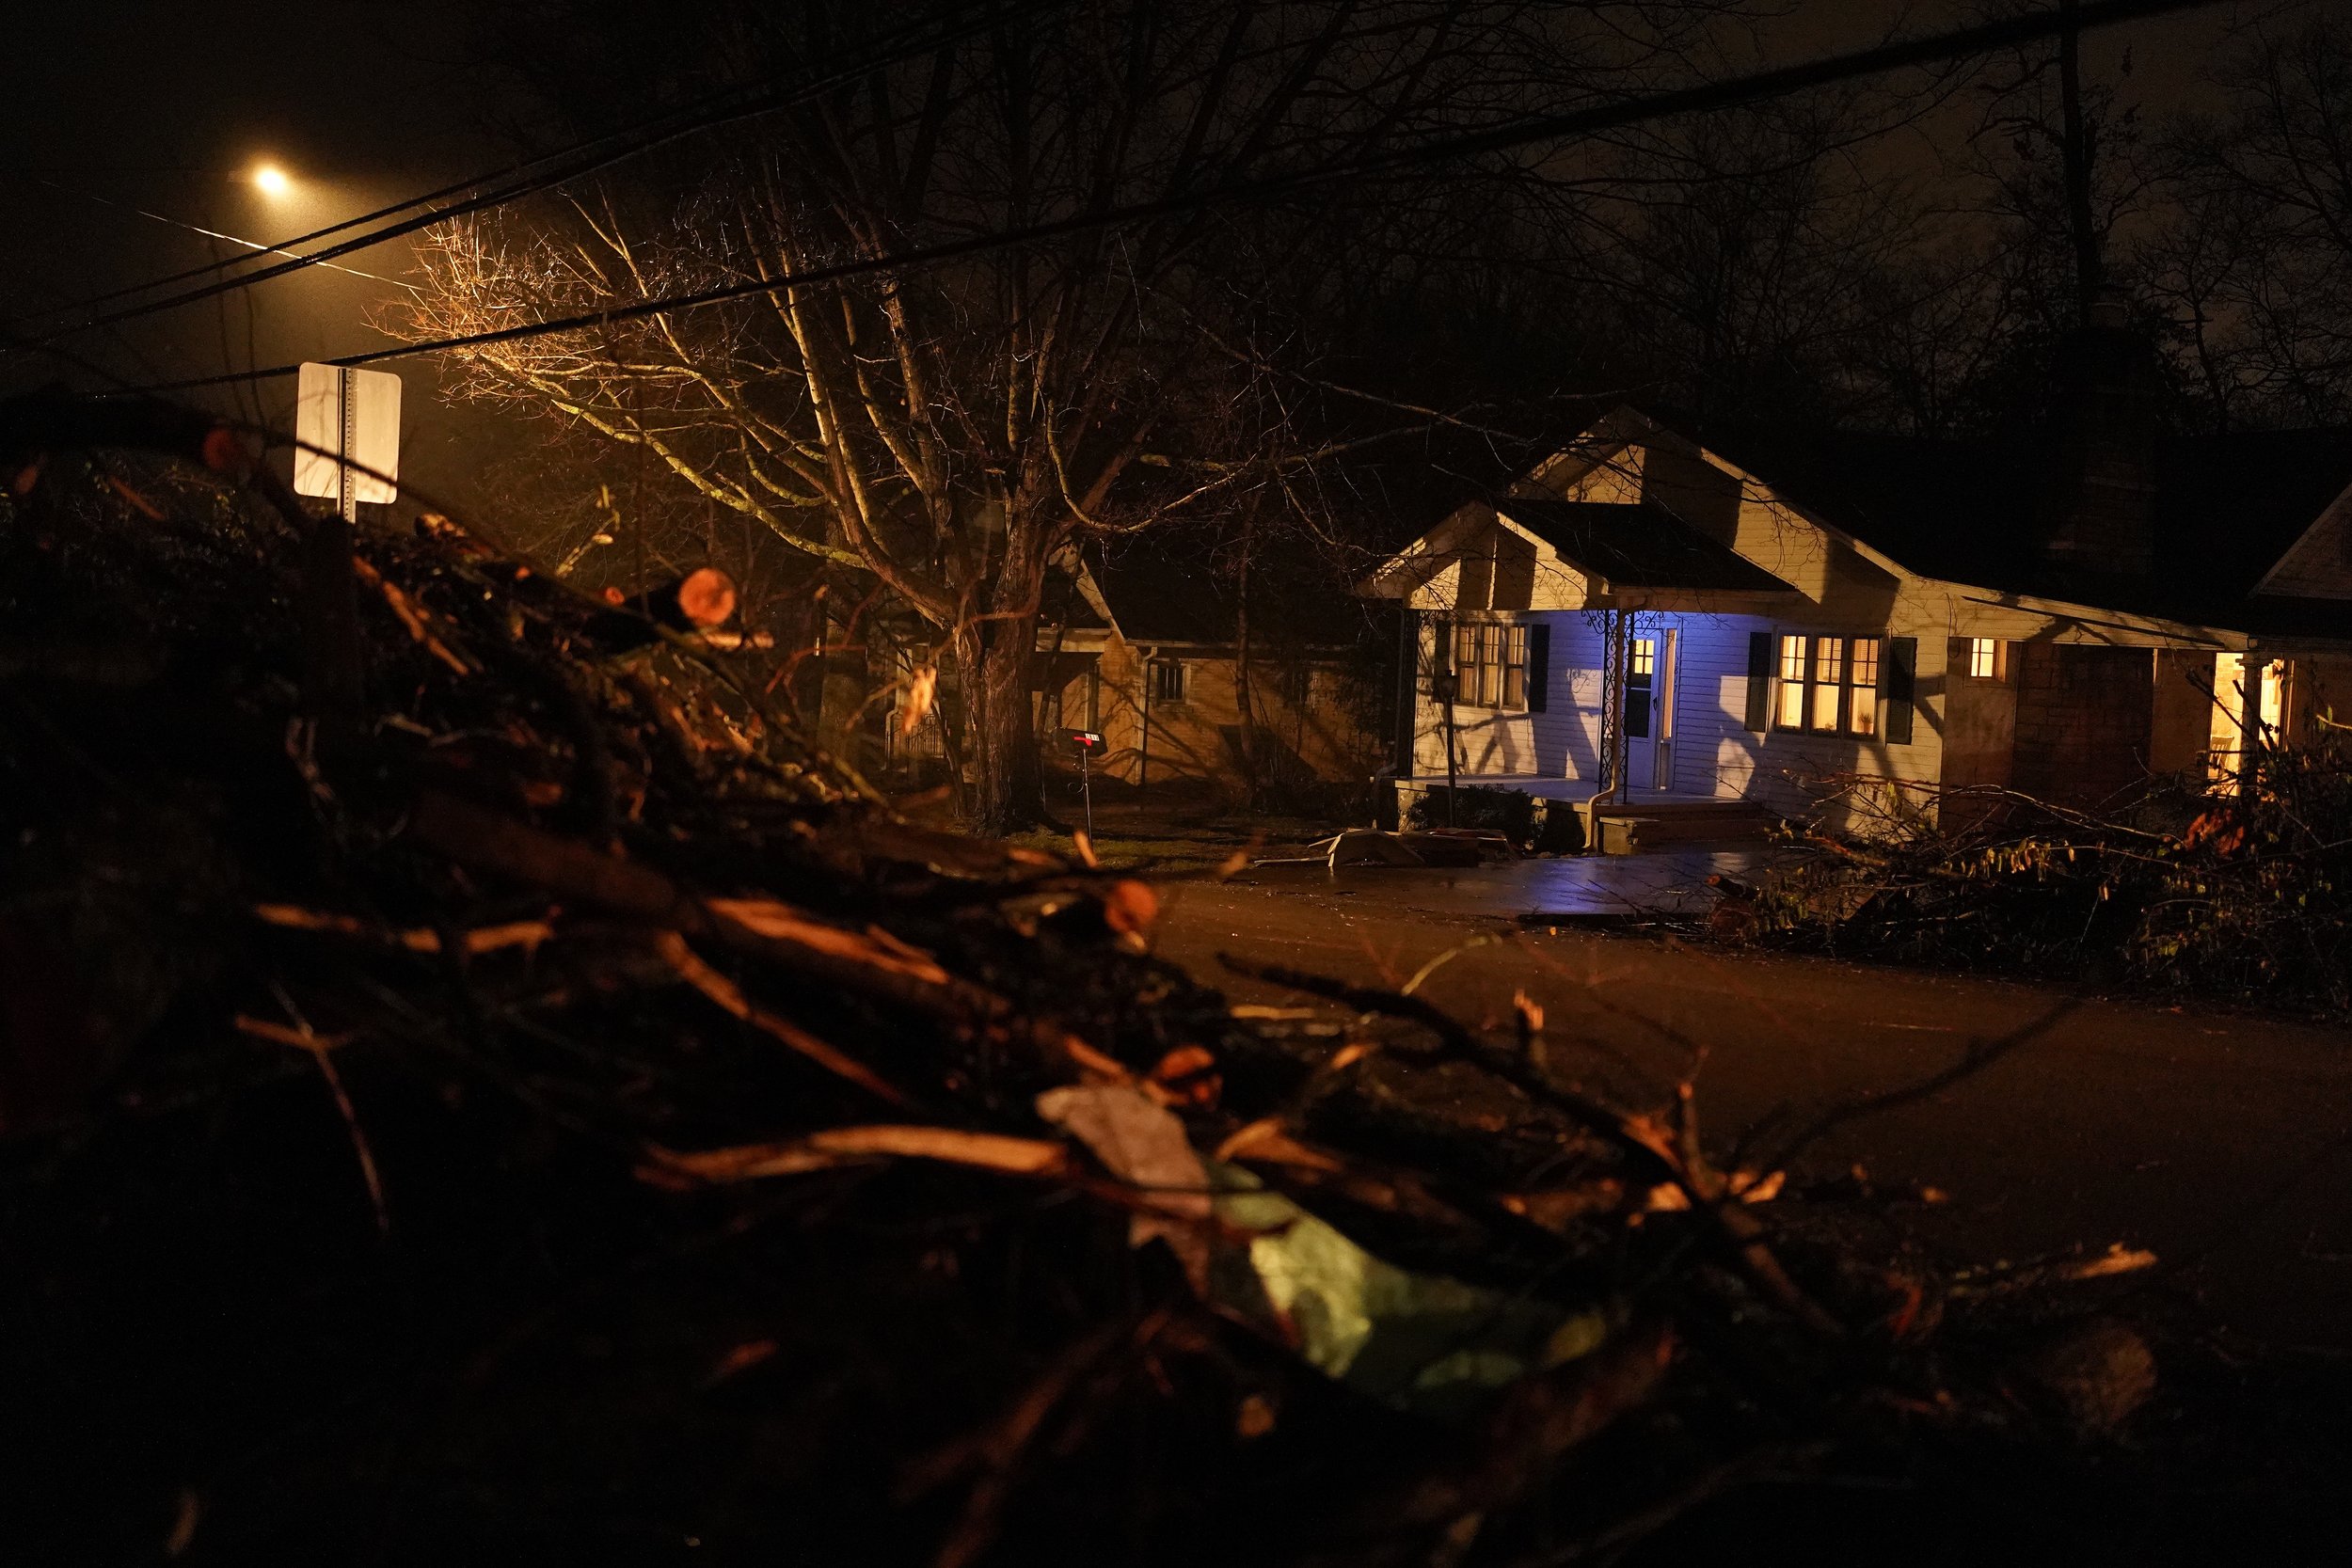  A home in Bowling Green, Ky., is illuminated by a street light and surrounded by tree branches and other debris on Friday, Dec. 17, 2021. (AP Photo/Brynn Anderson) 